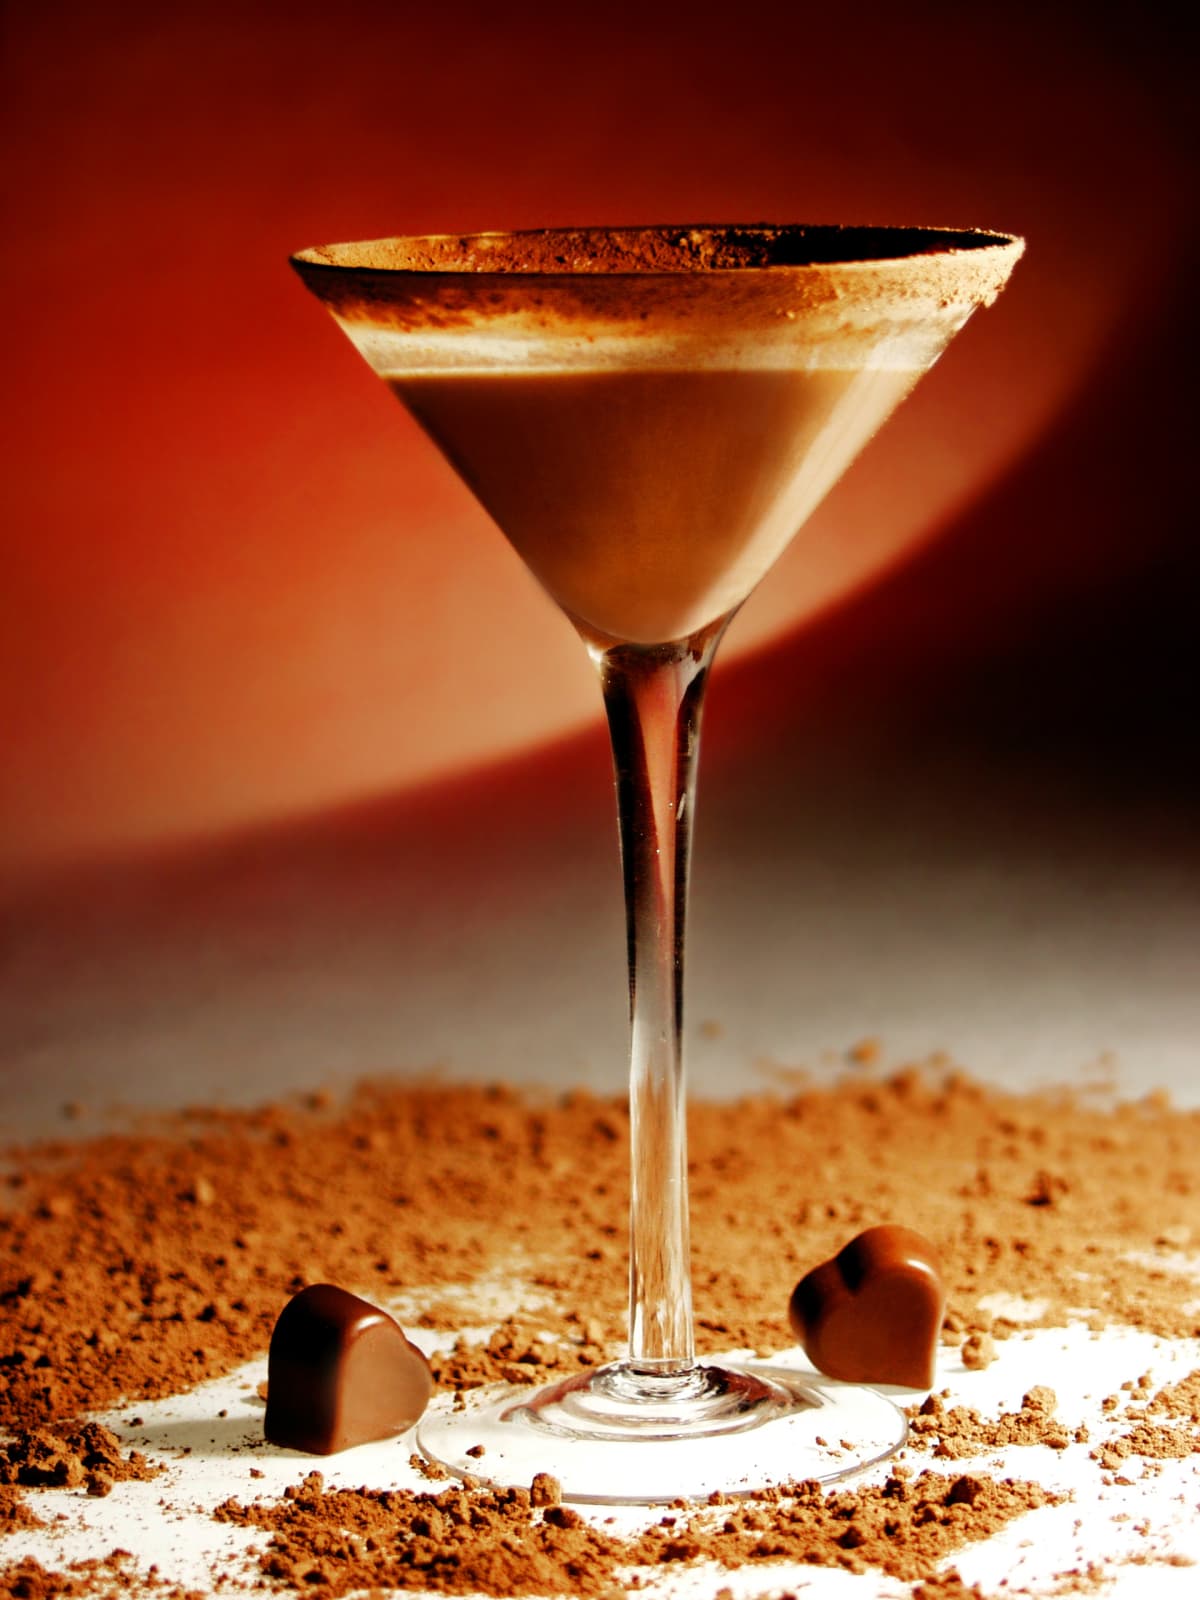 Chocolate martini surrounded by cocoa powder and chocolate candies.